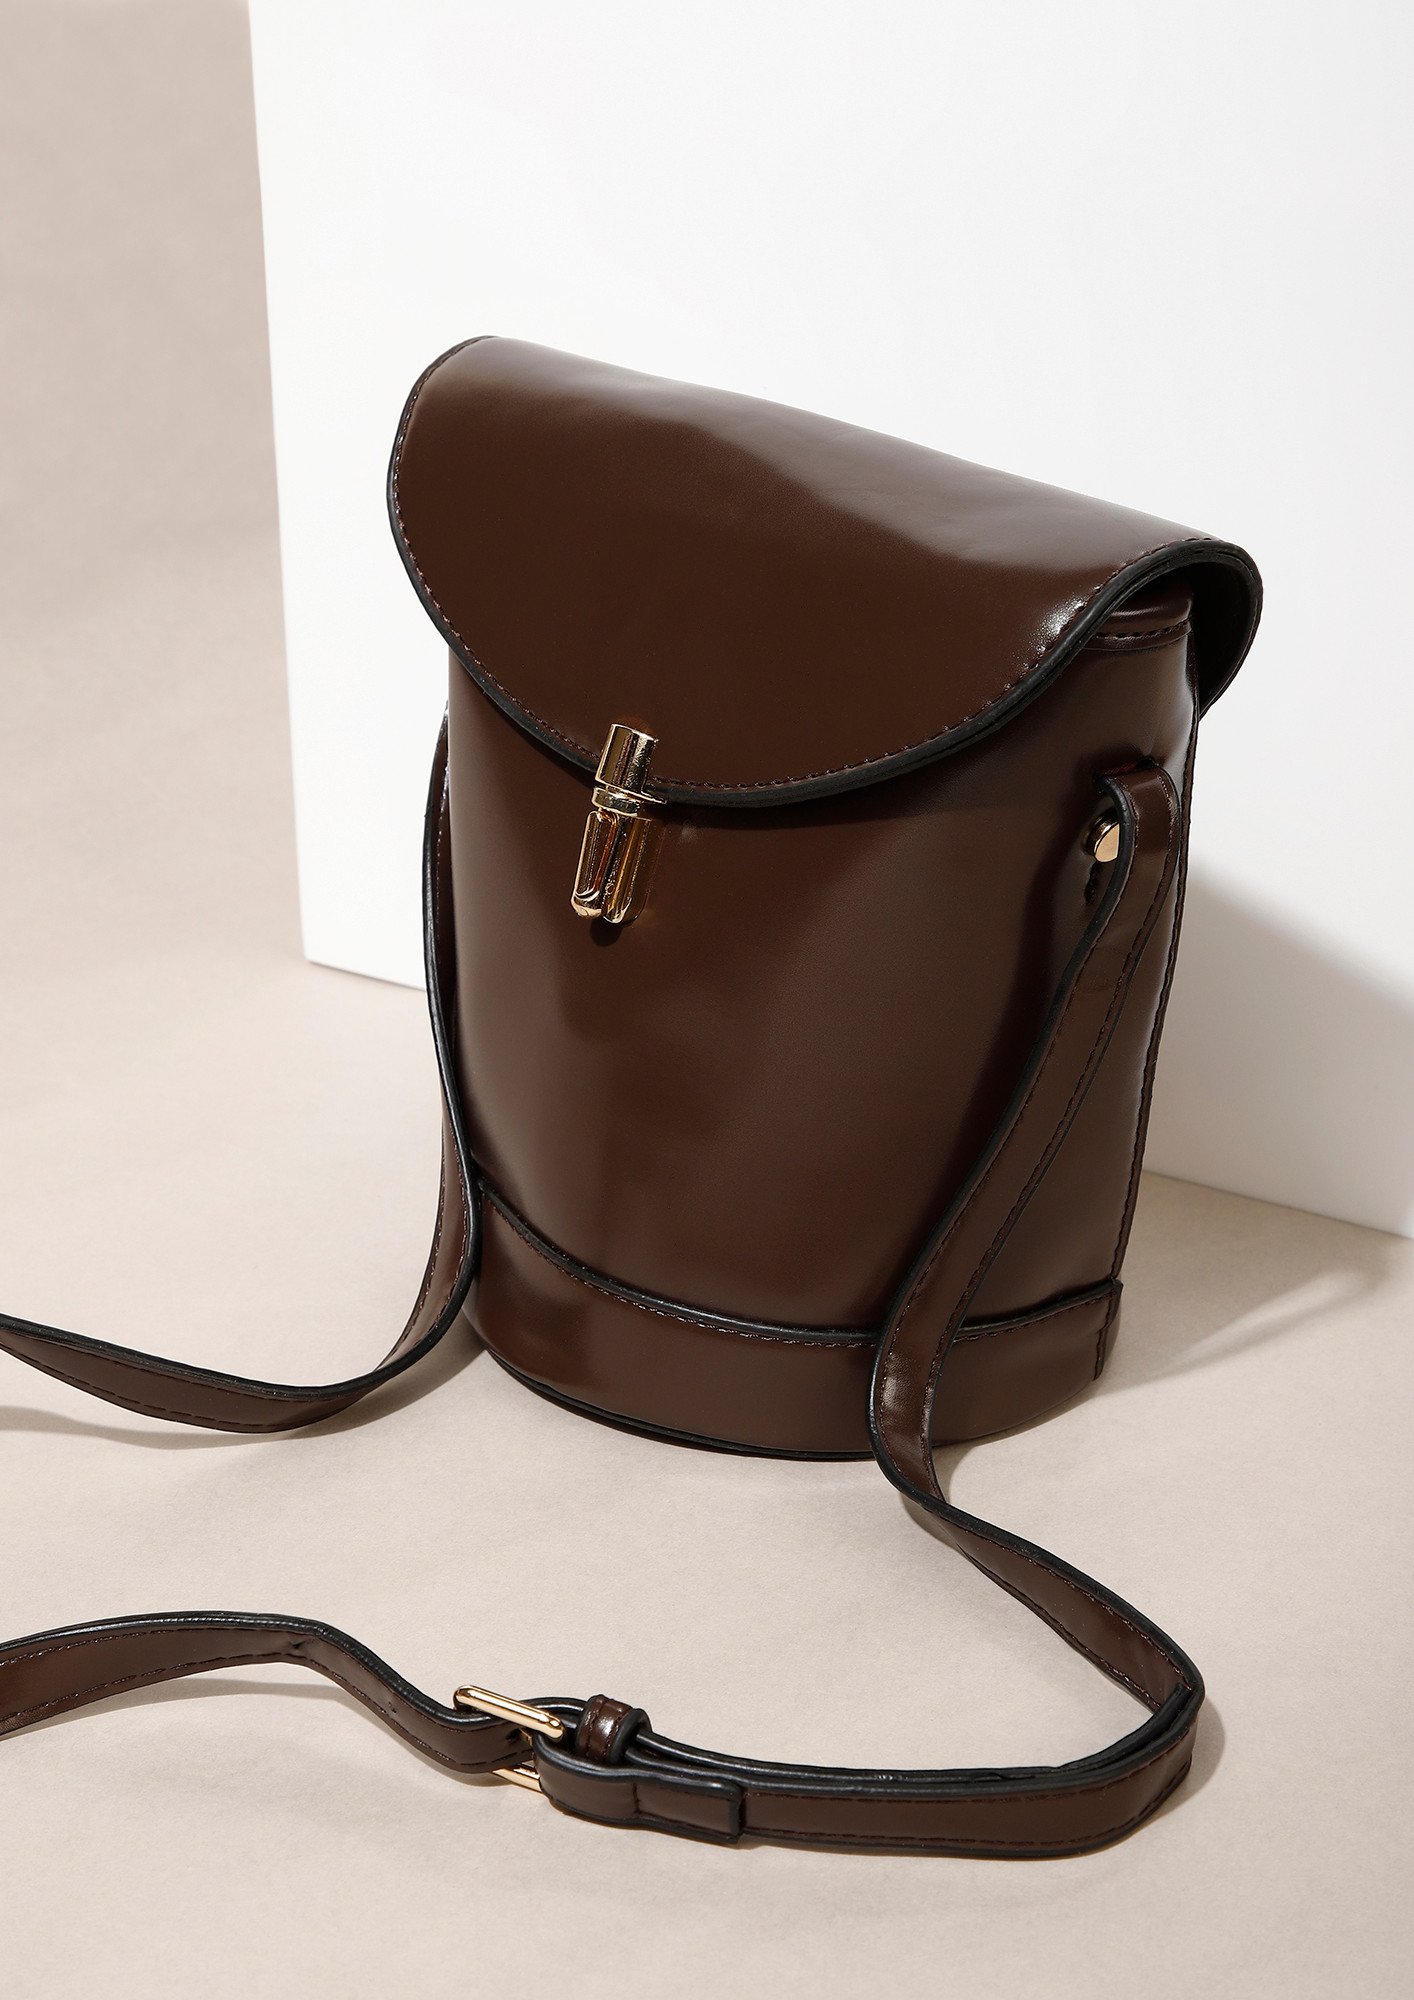 SMARTY ON THE STREET BROWN BUCKET BAG